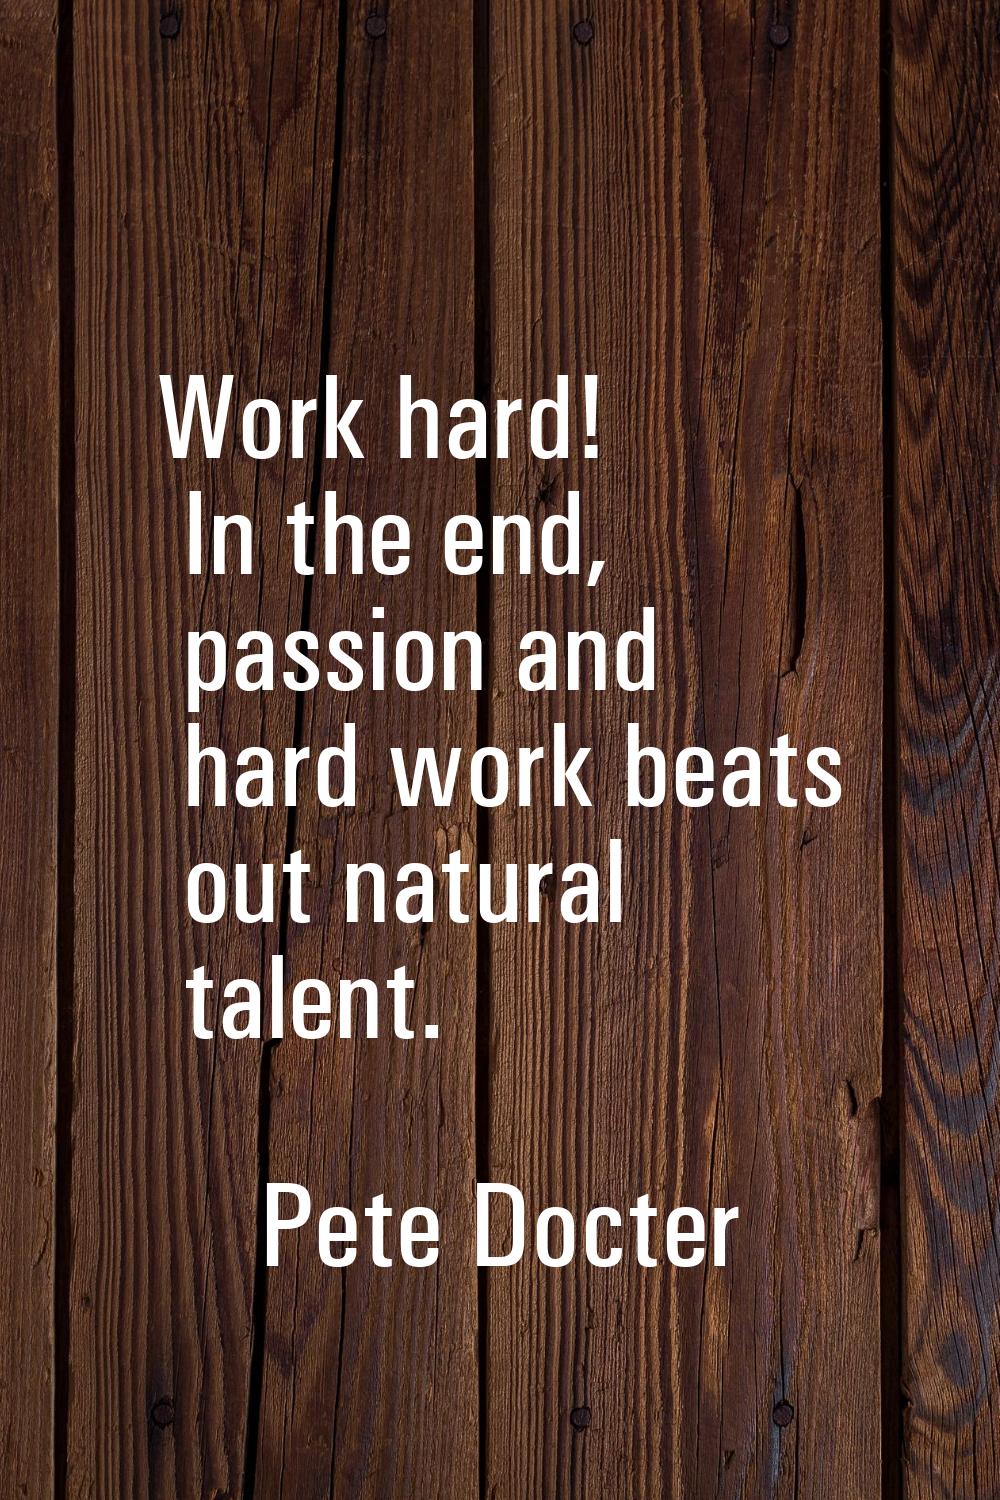 Work hard! In the end, passion and hard work beats out natural talent.